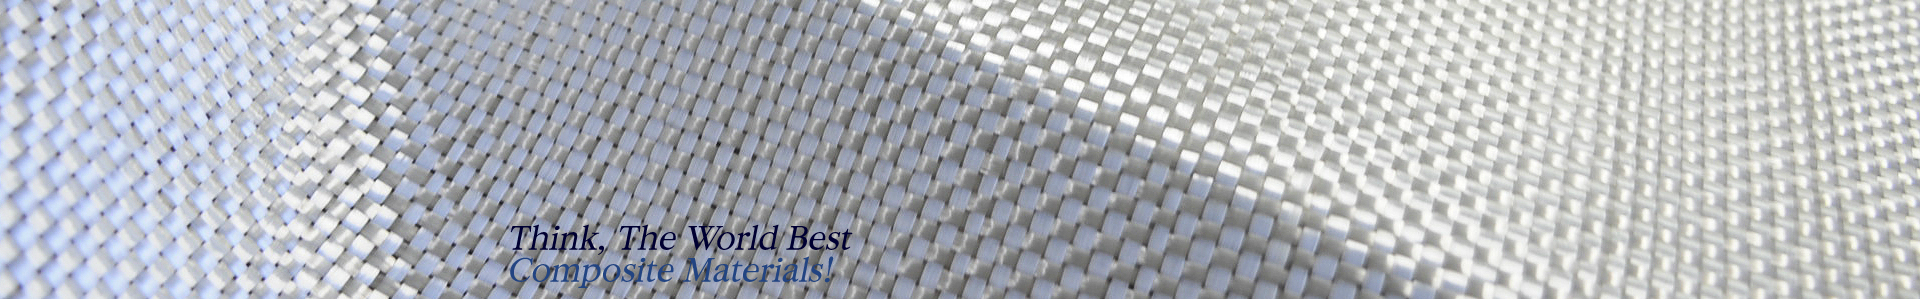 Think, The World Best Composite Materials!